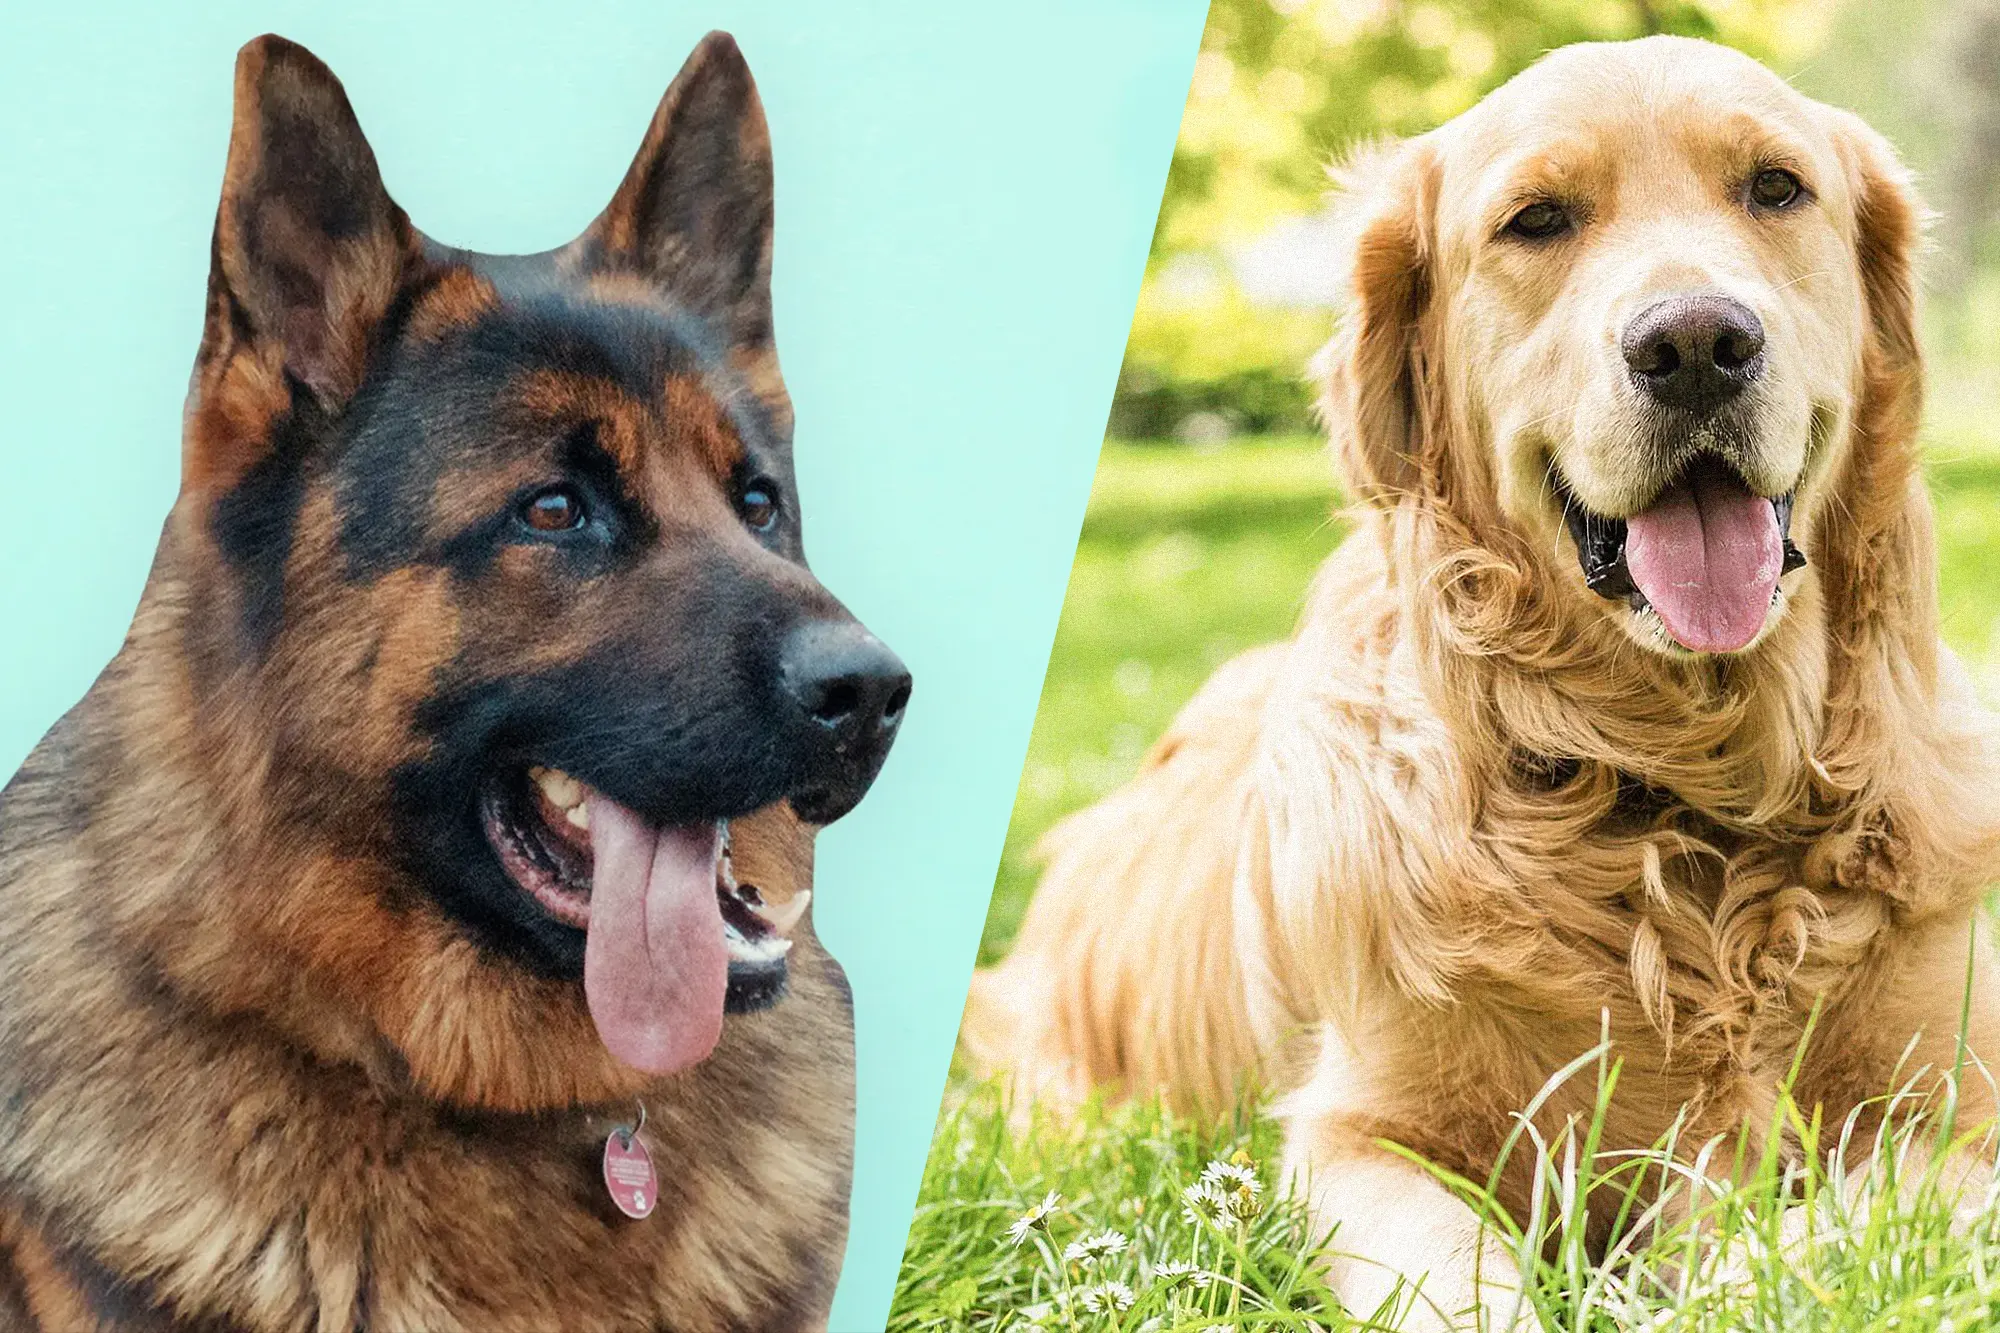 The Top 20 Dog Breeds Ranked